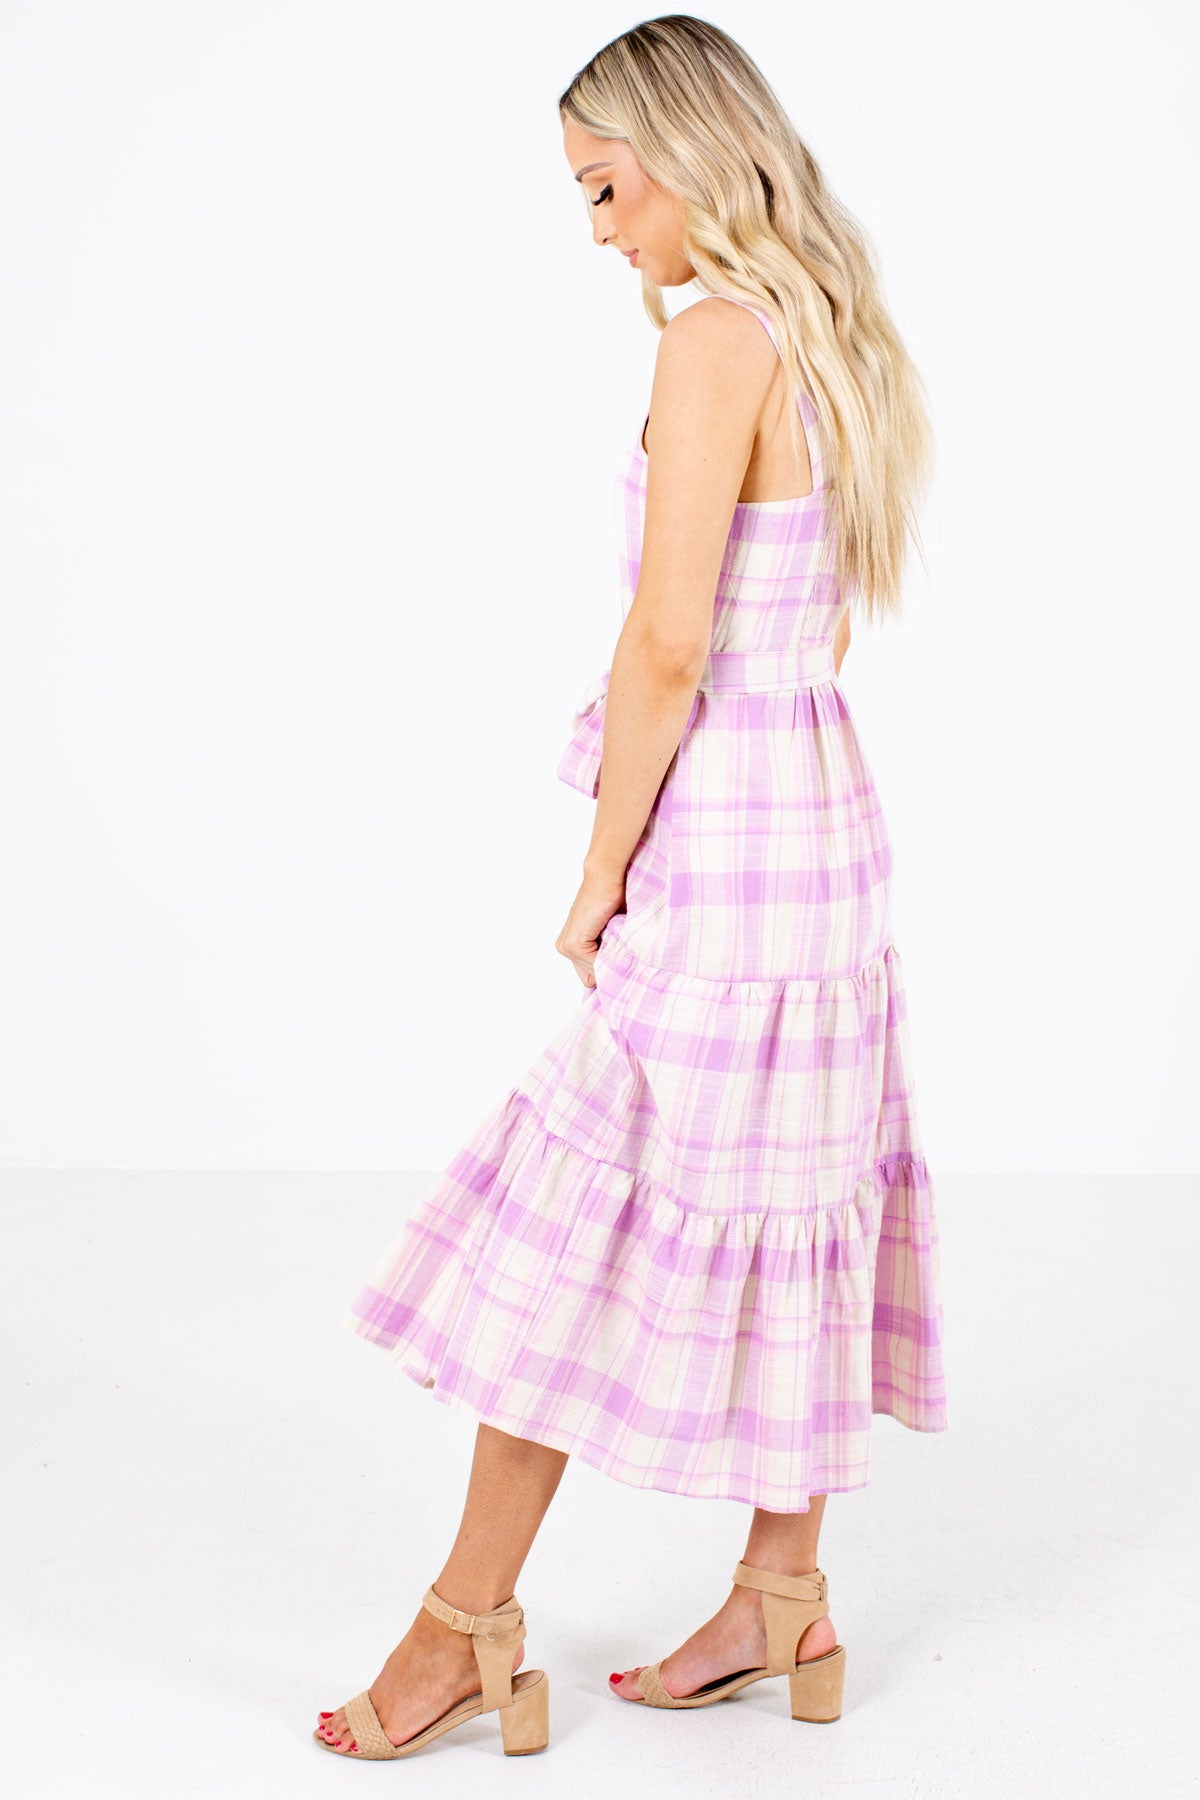 Women's Pink Partially Lined Boutique Midi Dress